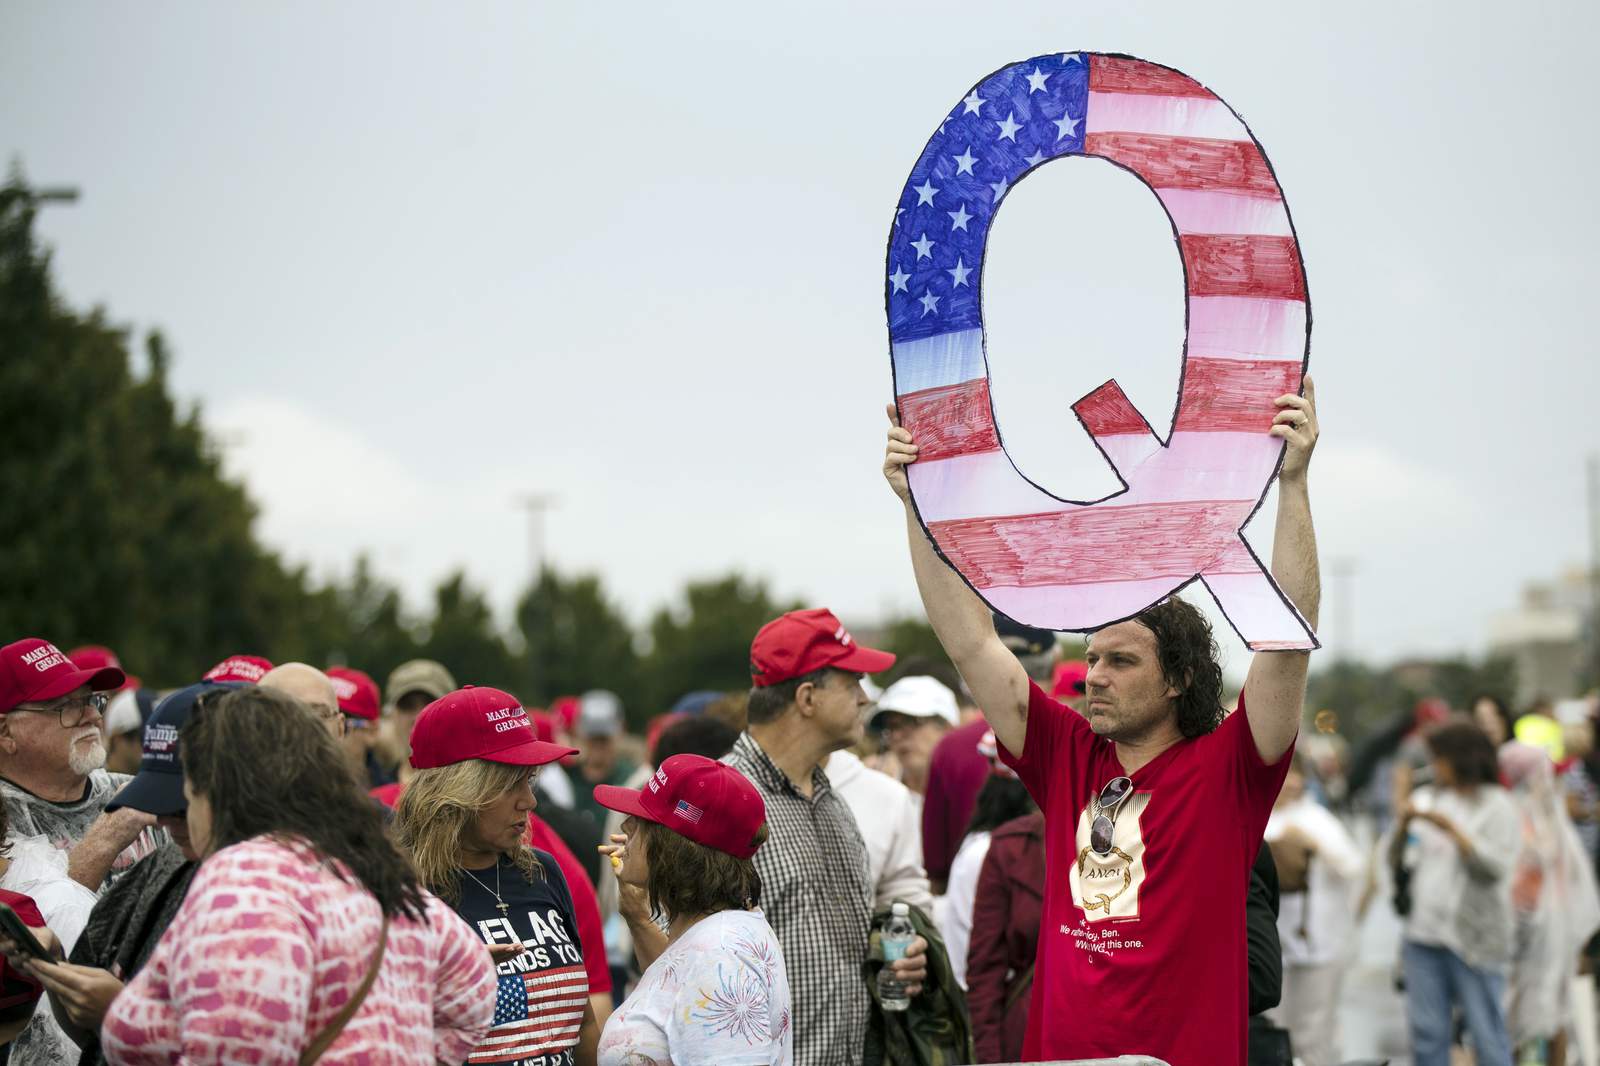 Facebook bans some, but not all, QAnon groups, accounts